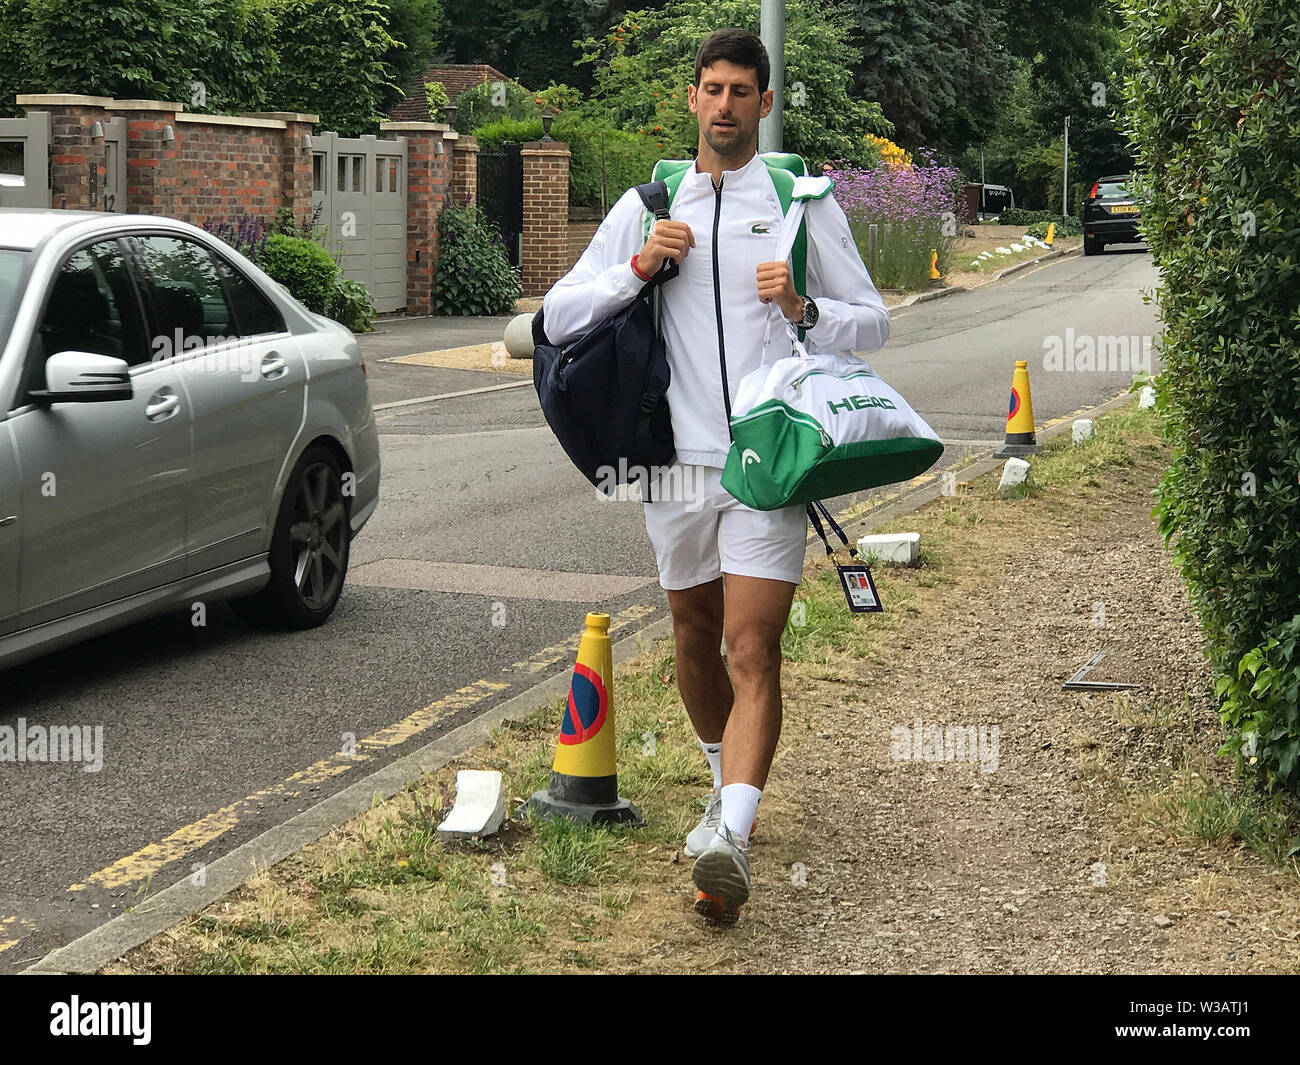 London, UK. 14 July 2019. The Championships Wimbledon 2019 14072019  A penny for your thoughts - Reigning Champion Novak Djokovic strolls from his rented house near Centre Court to face Roger Federer in today’s final. Credit: Roger Parker/Alamy Live News Stock Photo